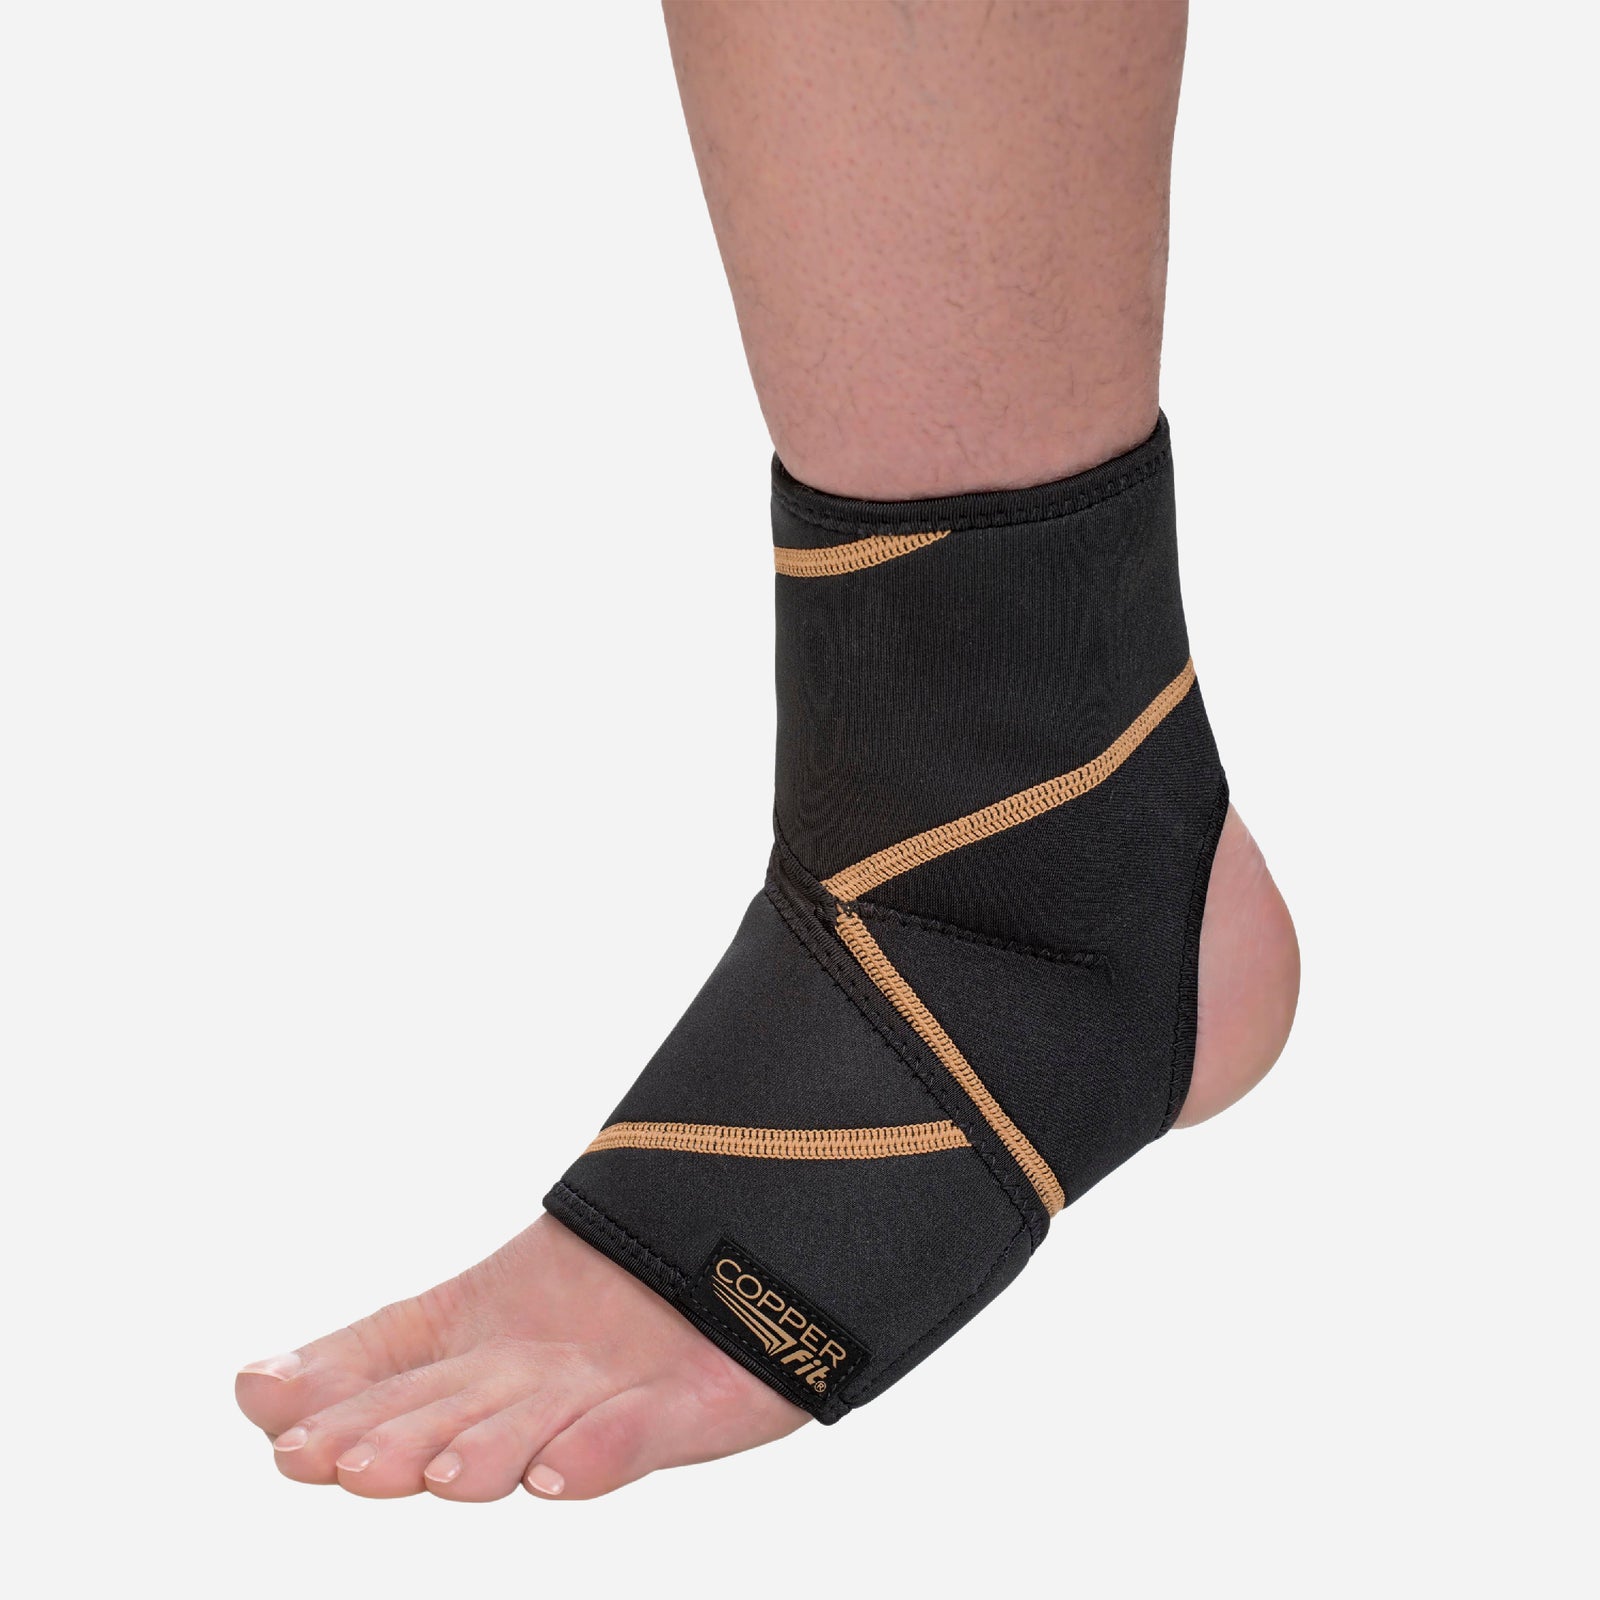 Rapid Relief Ankle & Foot Wraps Available at Copper Fit USA®